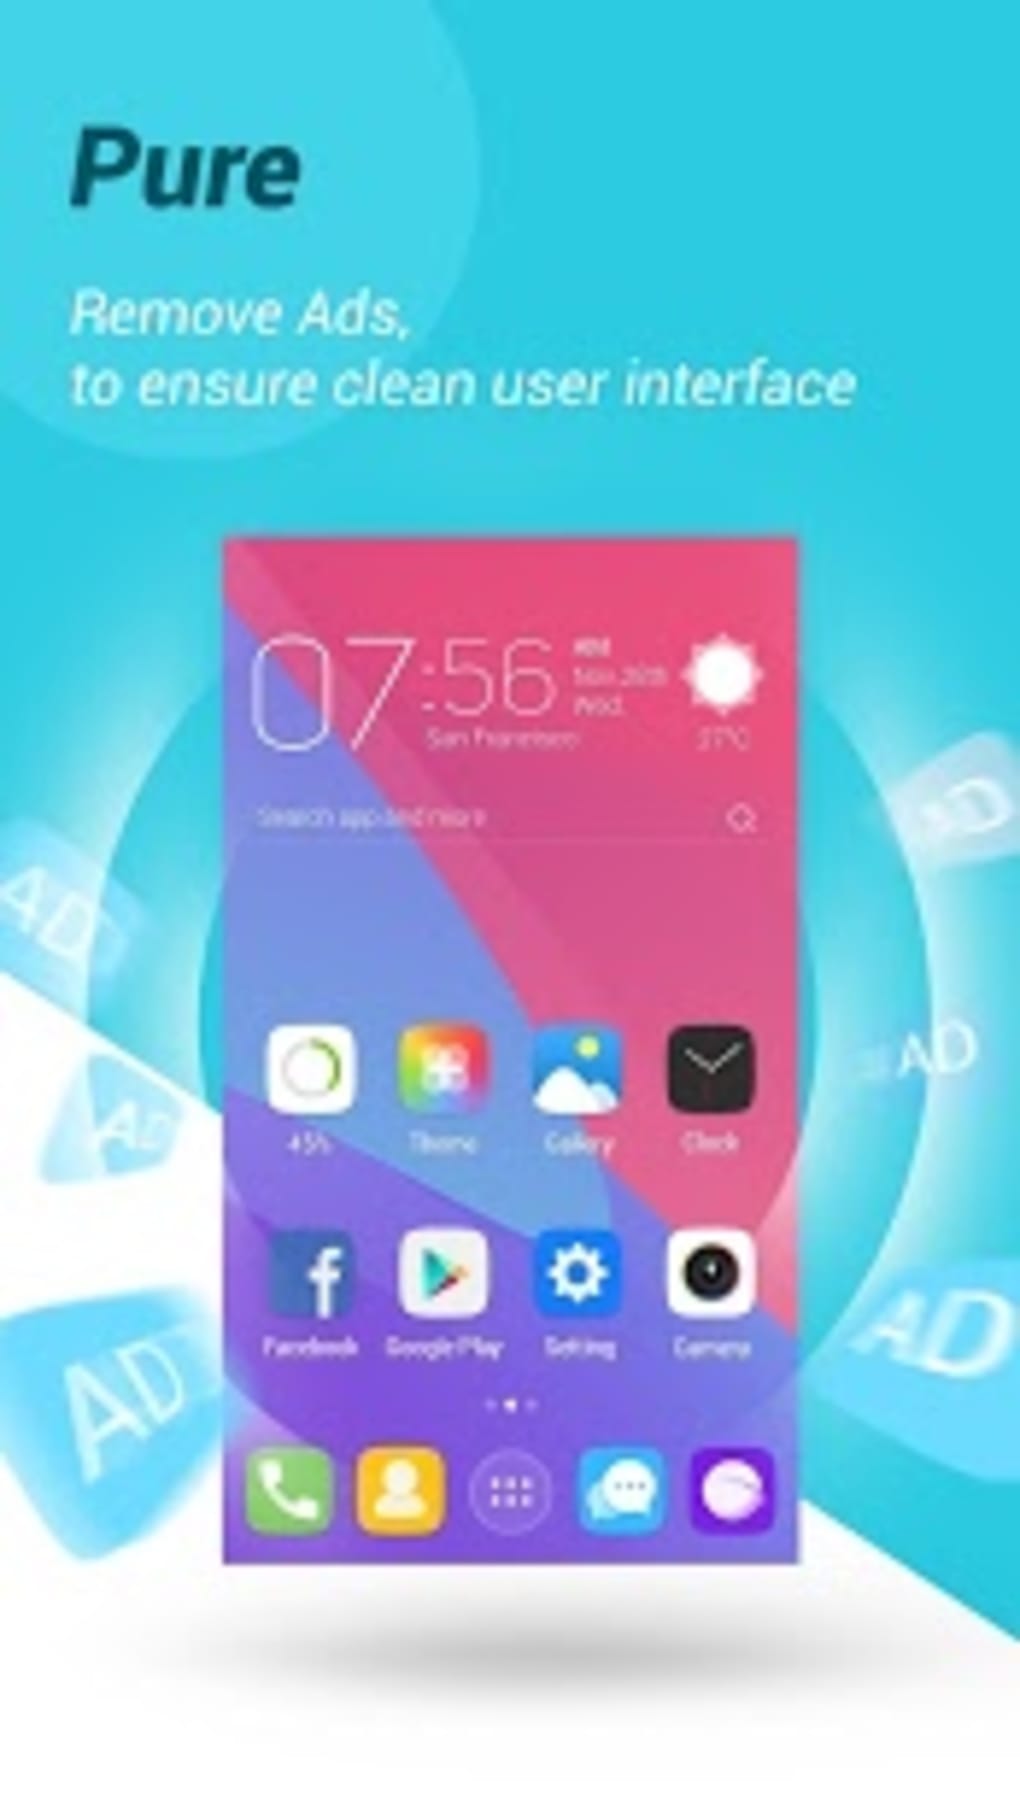 GO Launcher Prime (Remove Ads) APK for Android - Download